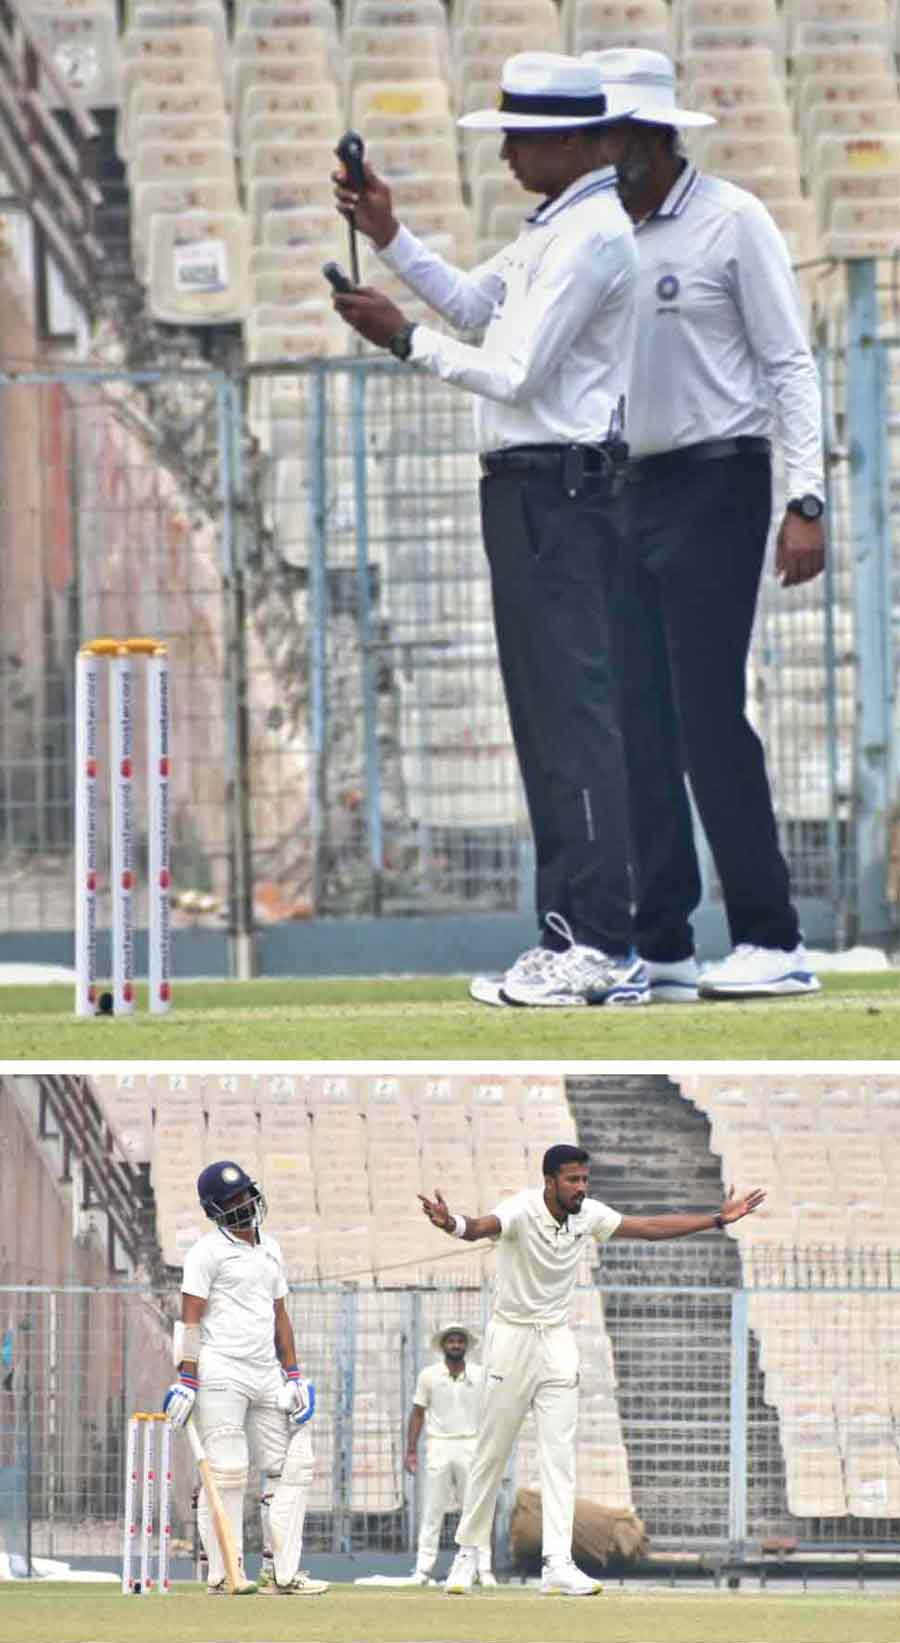 Umpires use a light meter to check the light conditions on the second day of the Ranji Trophy final between Bengal and Saurashtra at the Eden Gardens on Friday February 17. Ishan Porel took Sheldon Jackson’s wicket for Bengal before Saurashtra closed the day at 317/5 in 87 overs. Arpit Vasavada and Chirag Jani of Saurashtra will return to the crease on the third day.